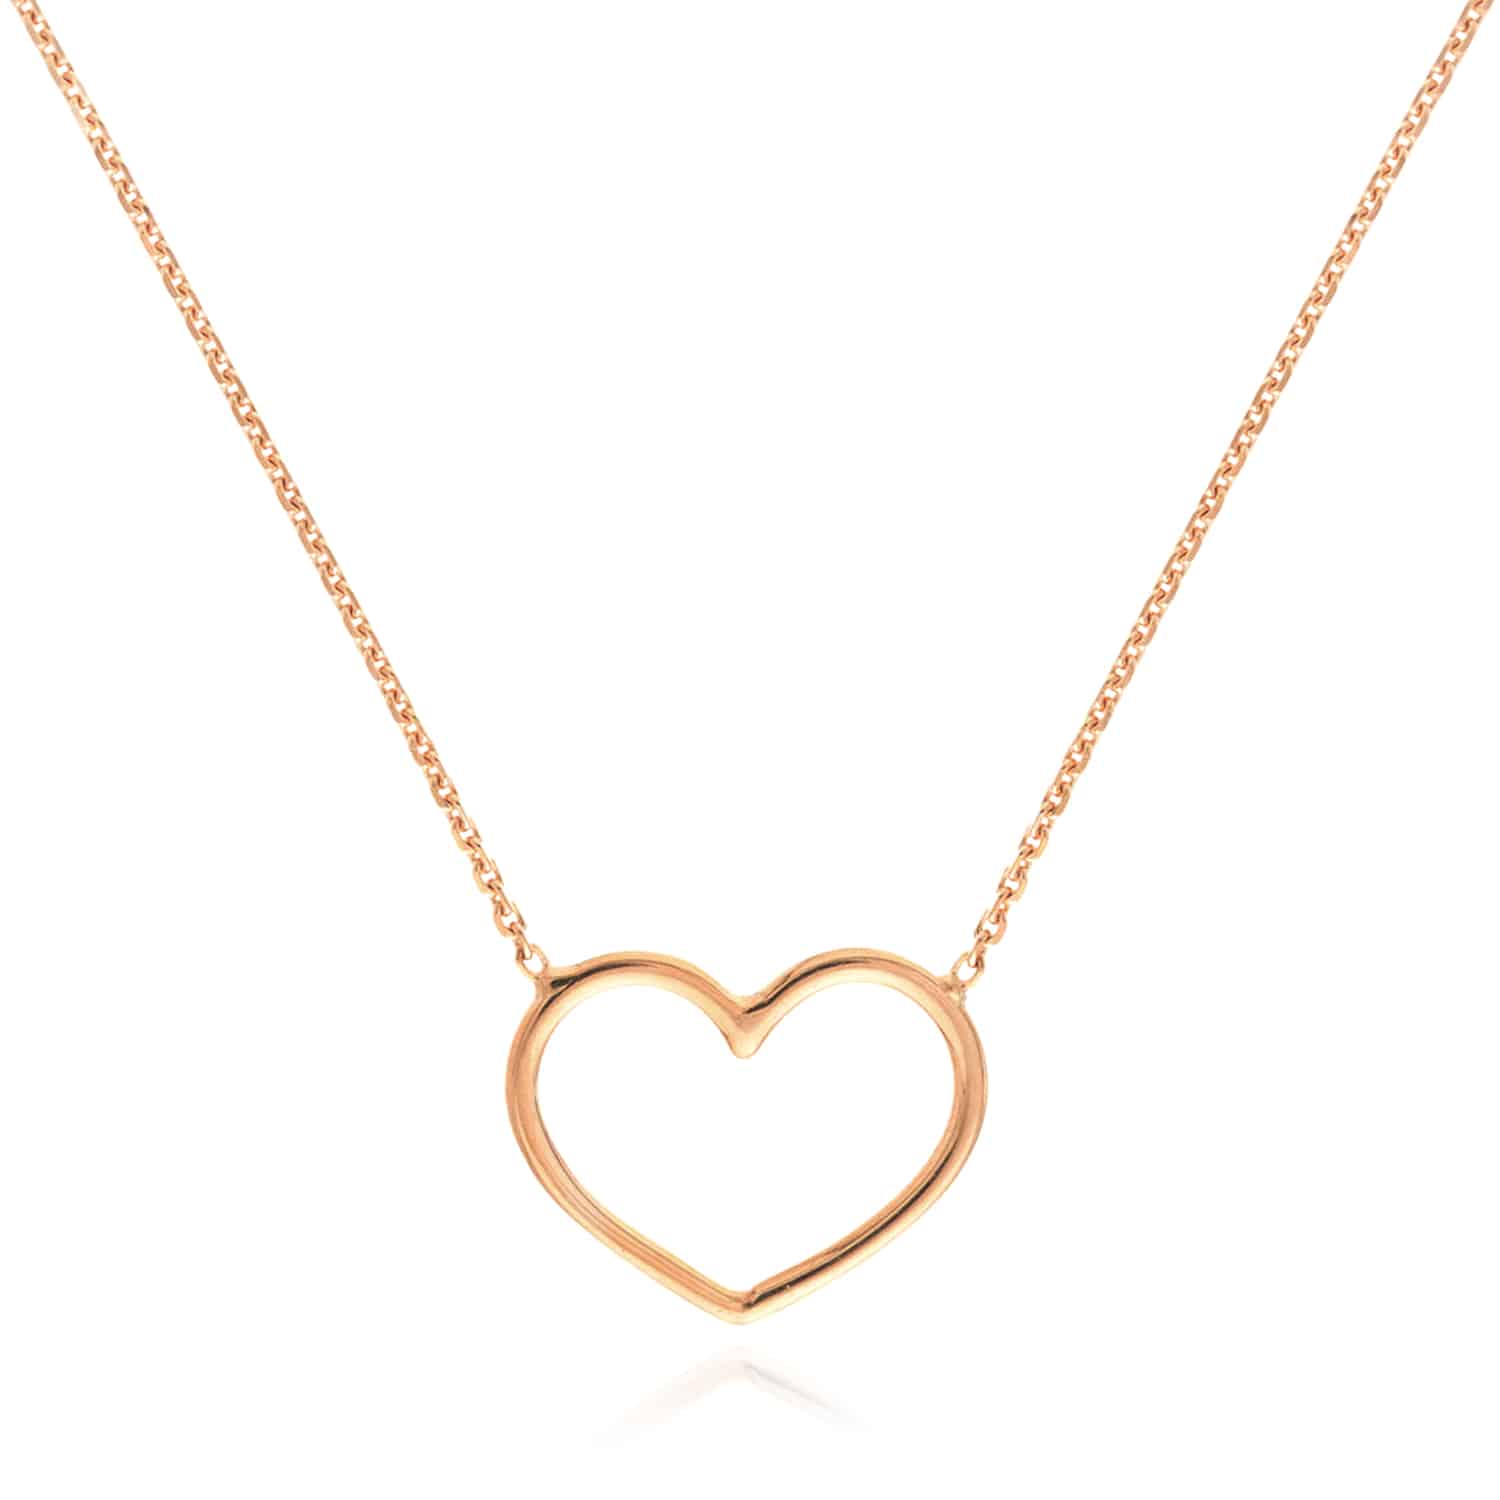 14K Gold Yellow White Rose 0.8mm Open Heart Pendant Necklace 16"-18" Adjustable - Rose Gold